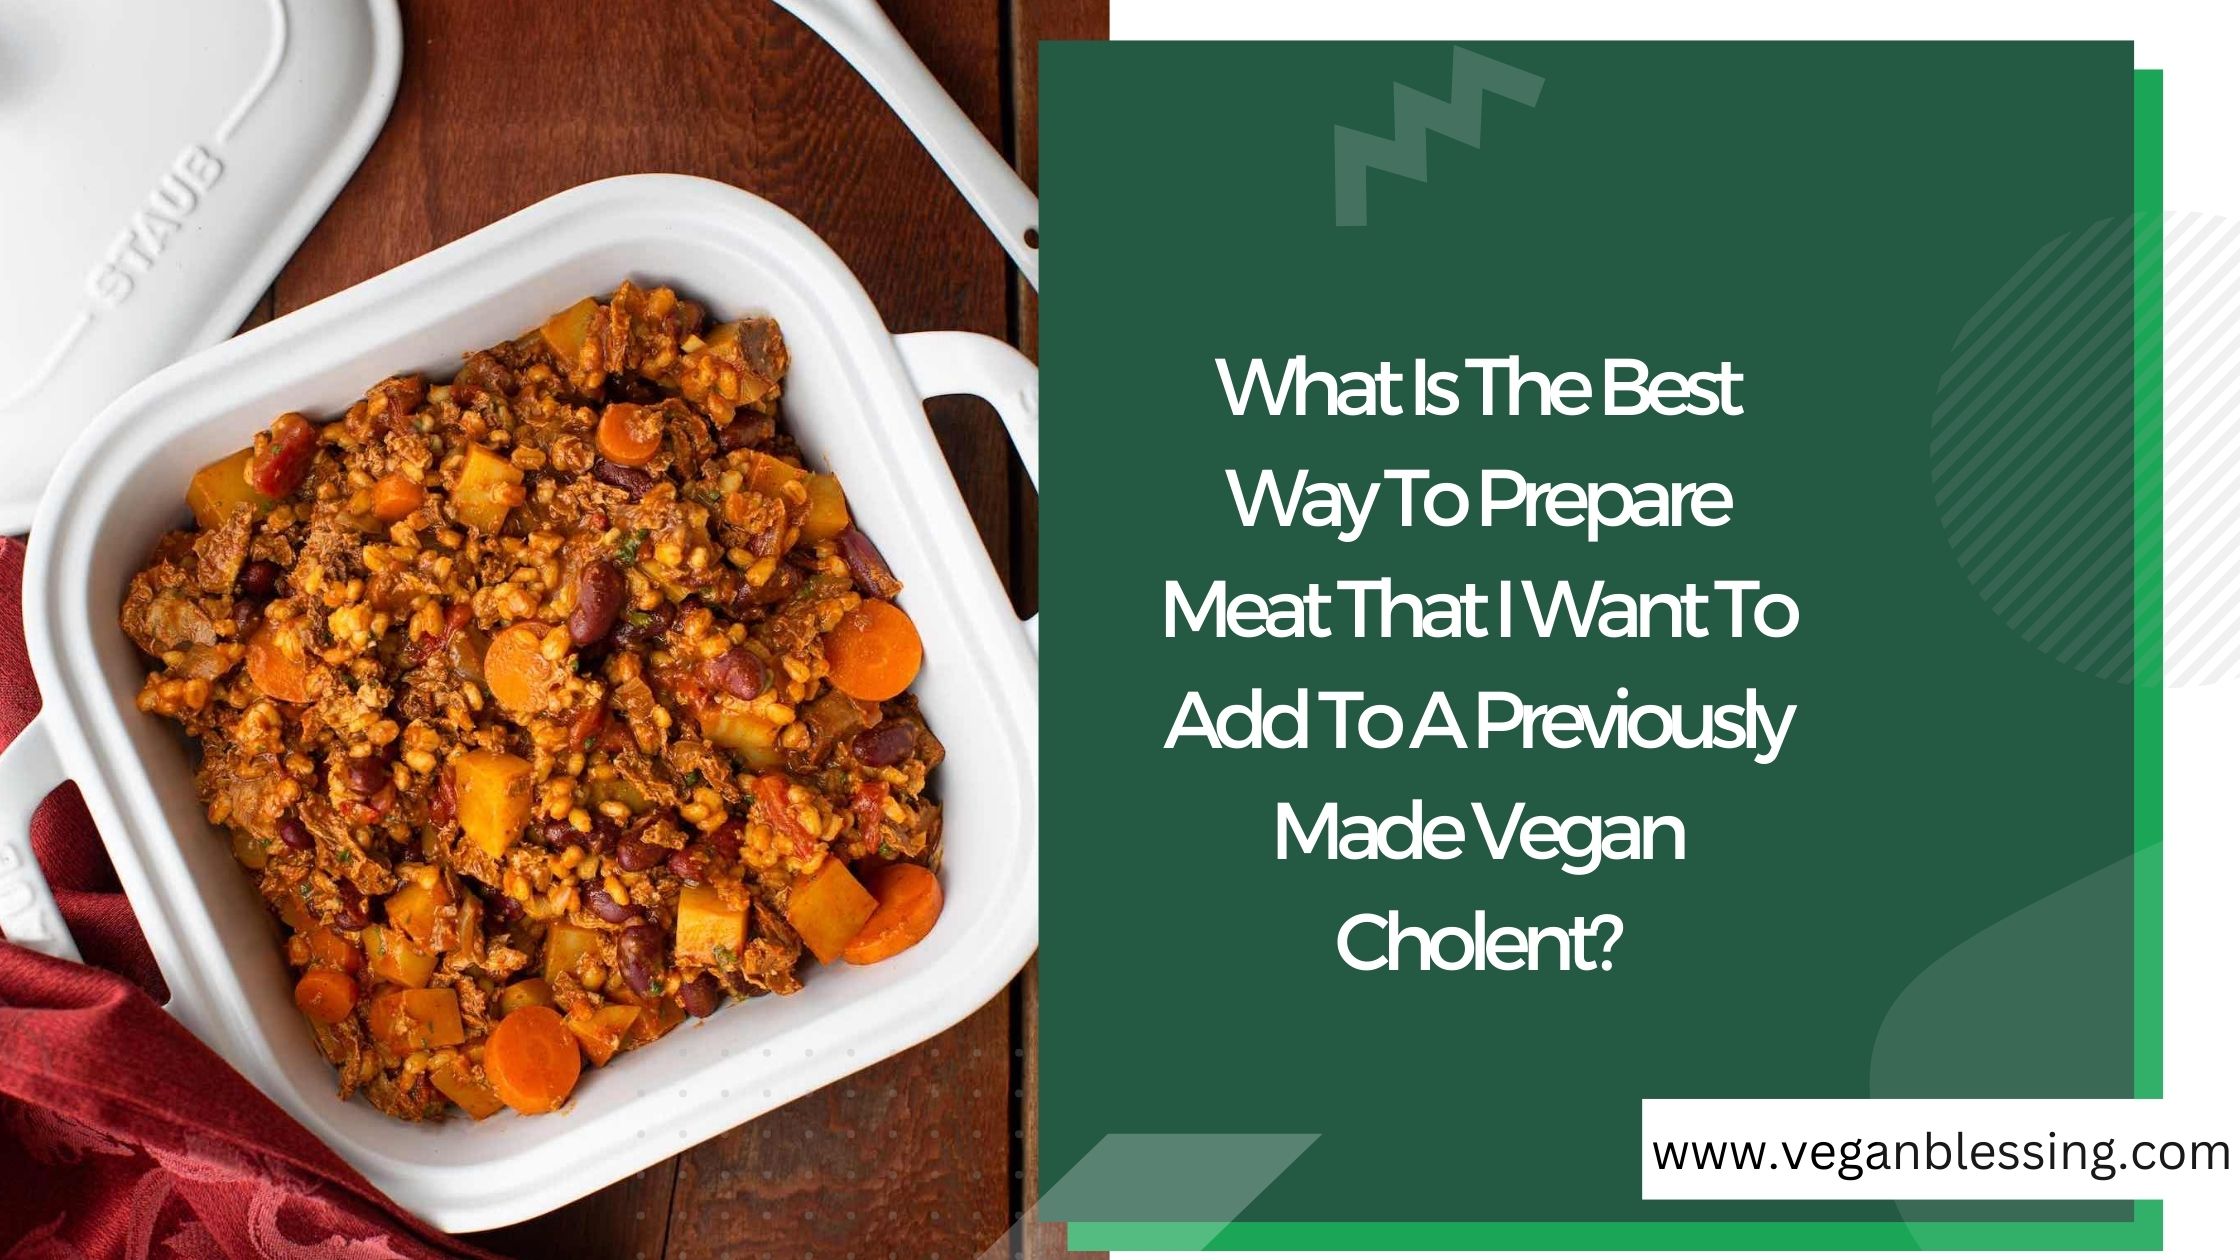 What Is The Best Way To Prepare Meat That I Want To Add To A Previously Made Vegan Cholent? What Is The Best Way To Prepare Meat That I Want To Add To A Previously Made Vegan Cholent